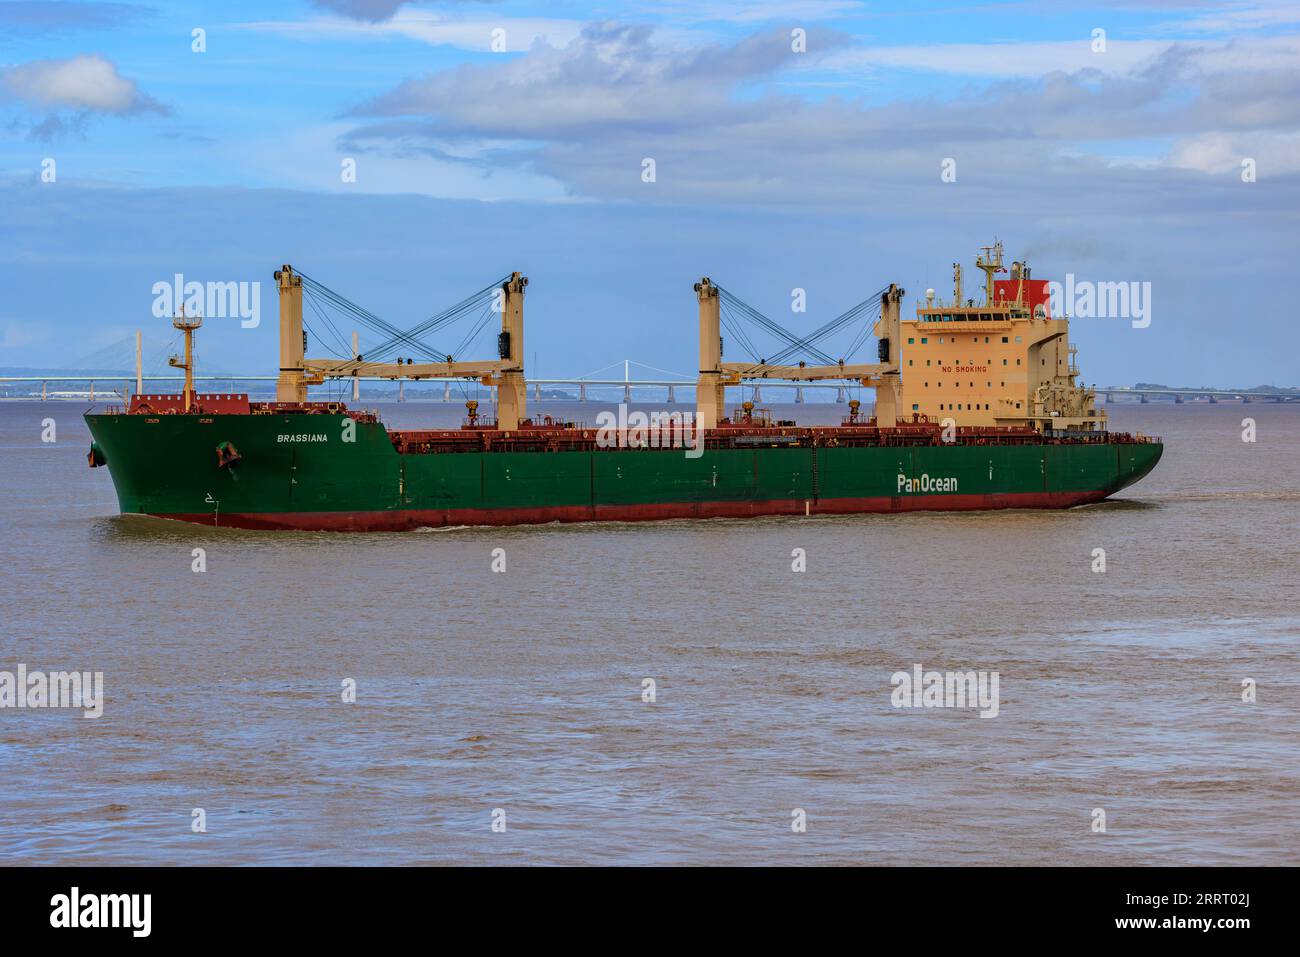 Bulk carrier heading out to sea Stock Photo